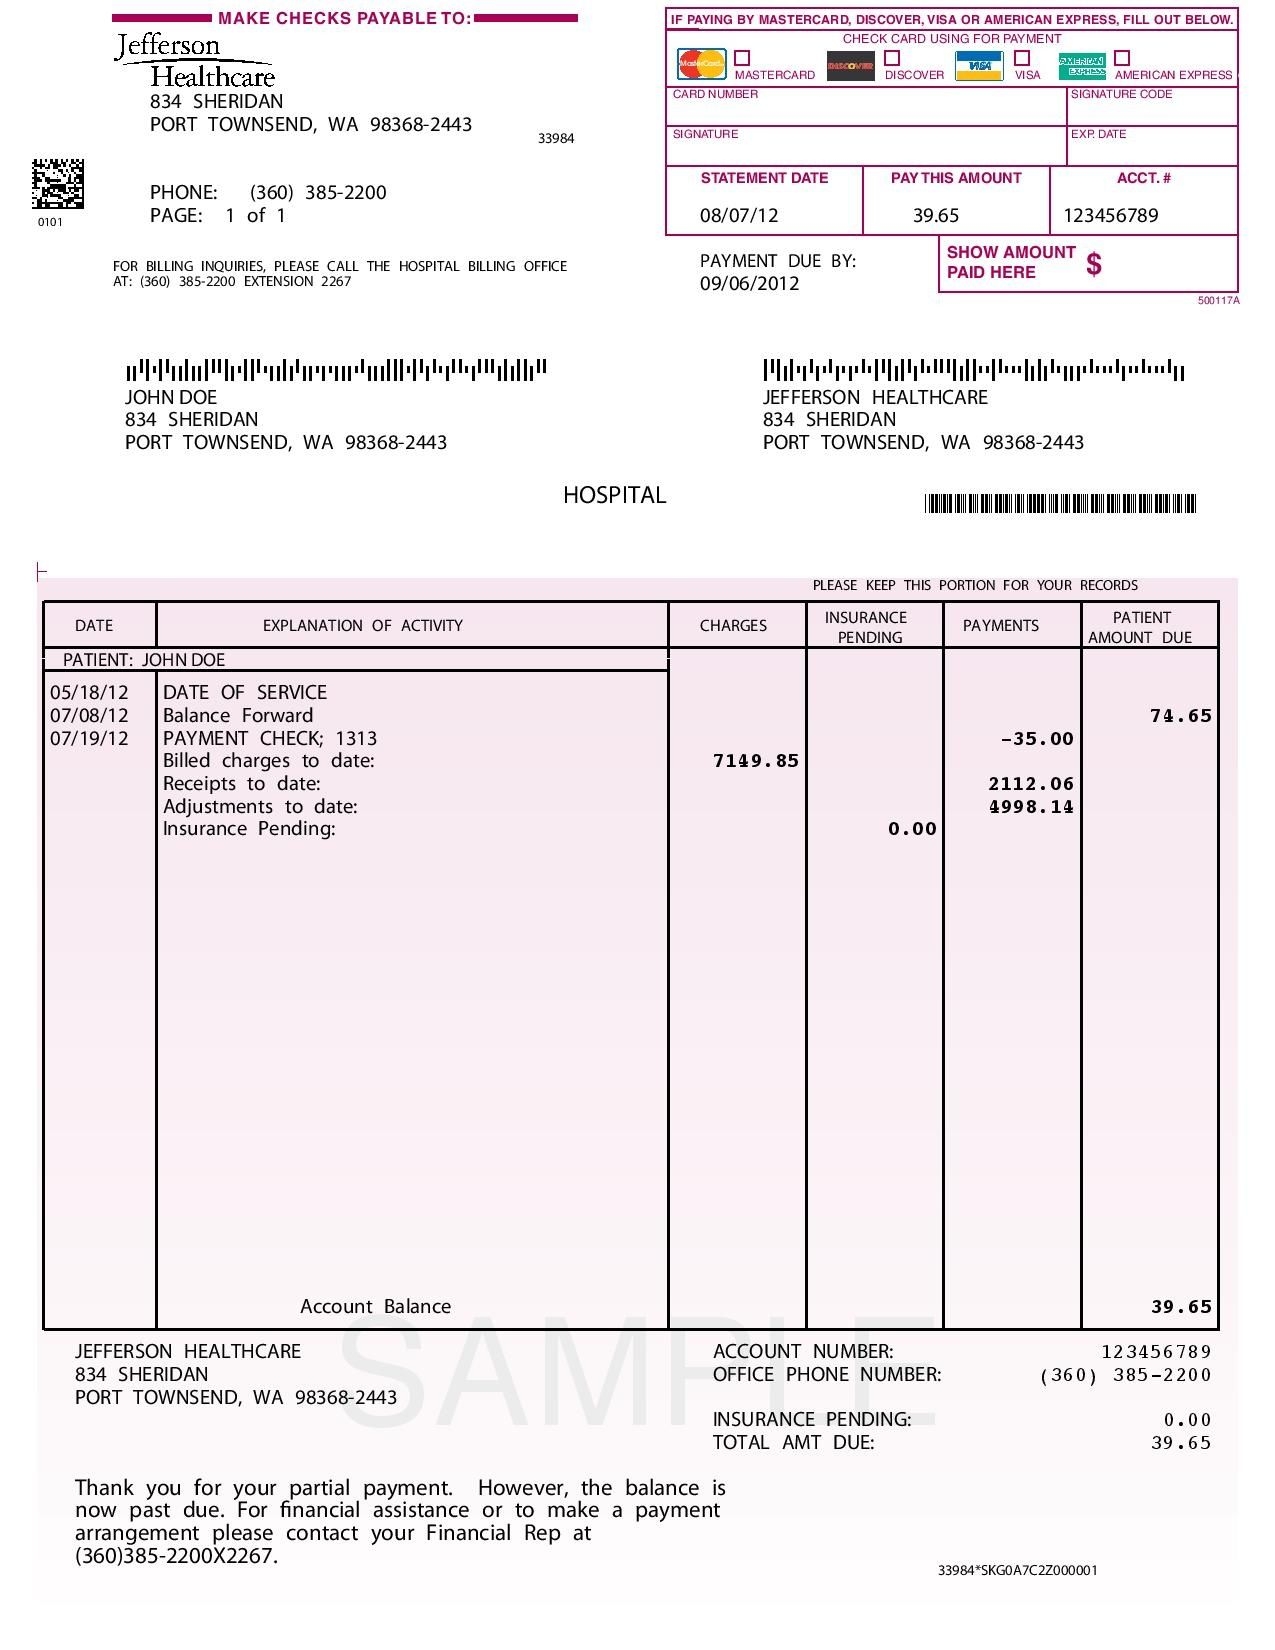 10 best images of sample of invoice for payment sample invoice for payment form